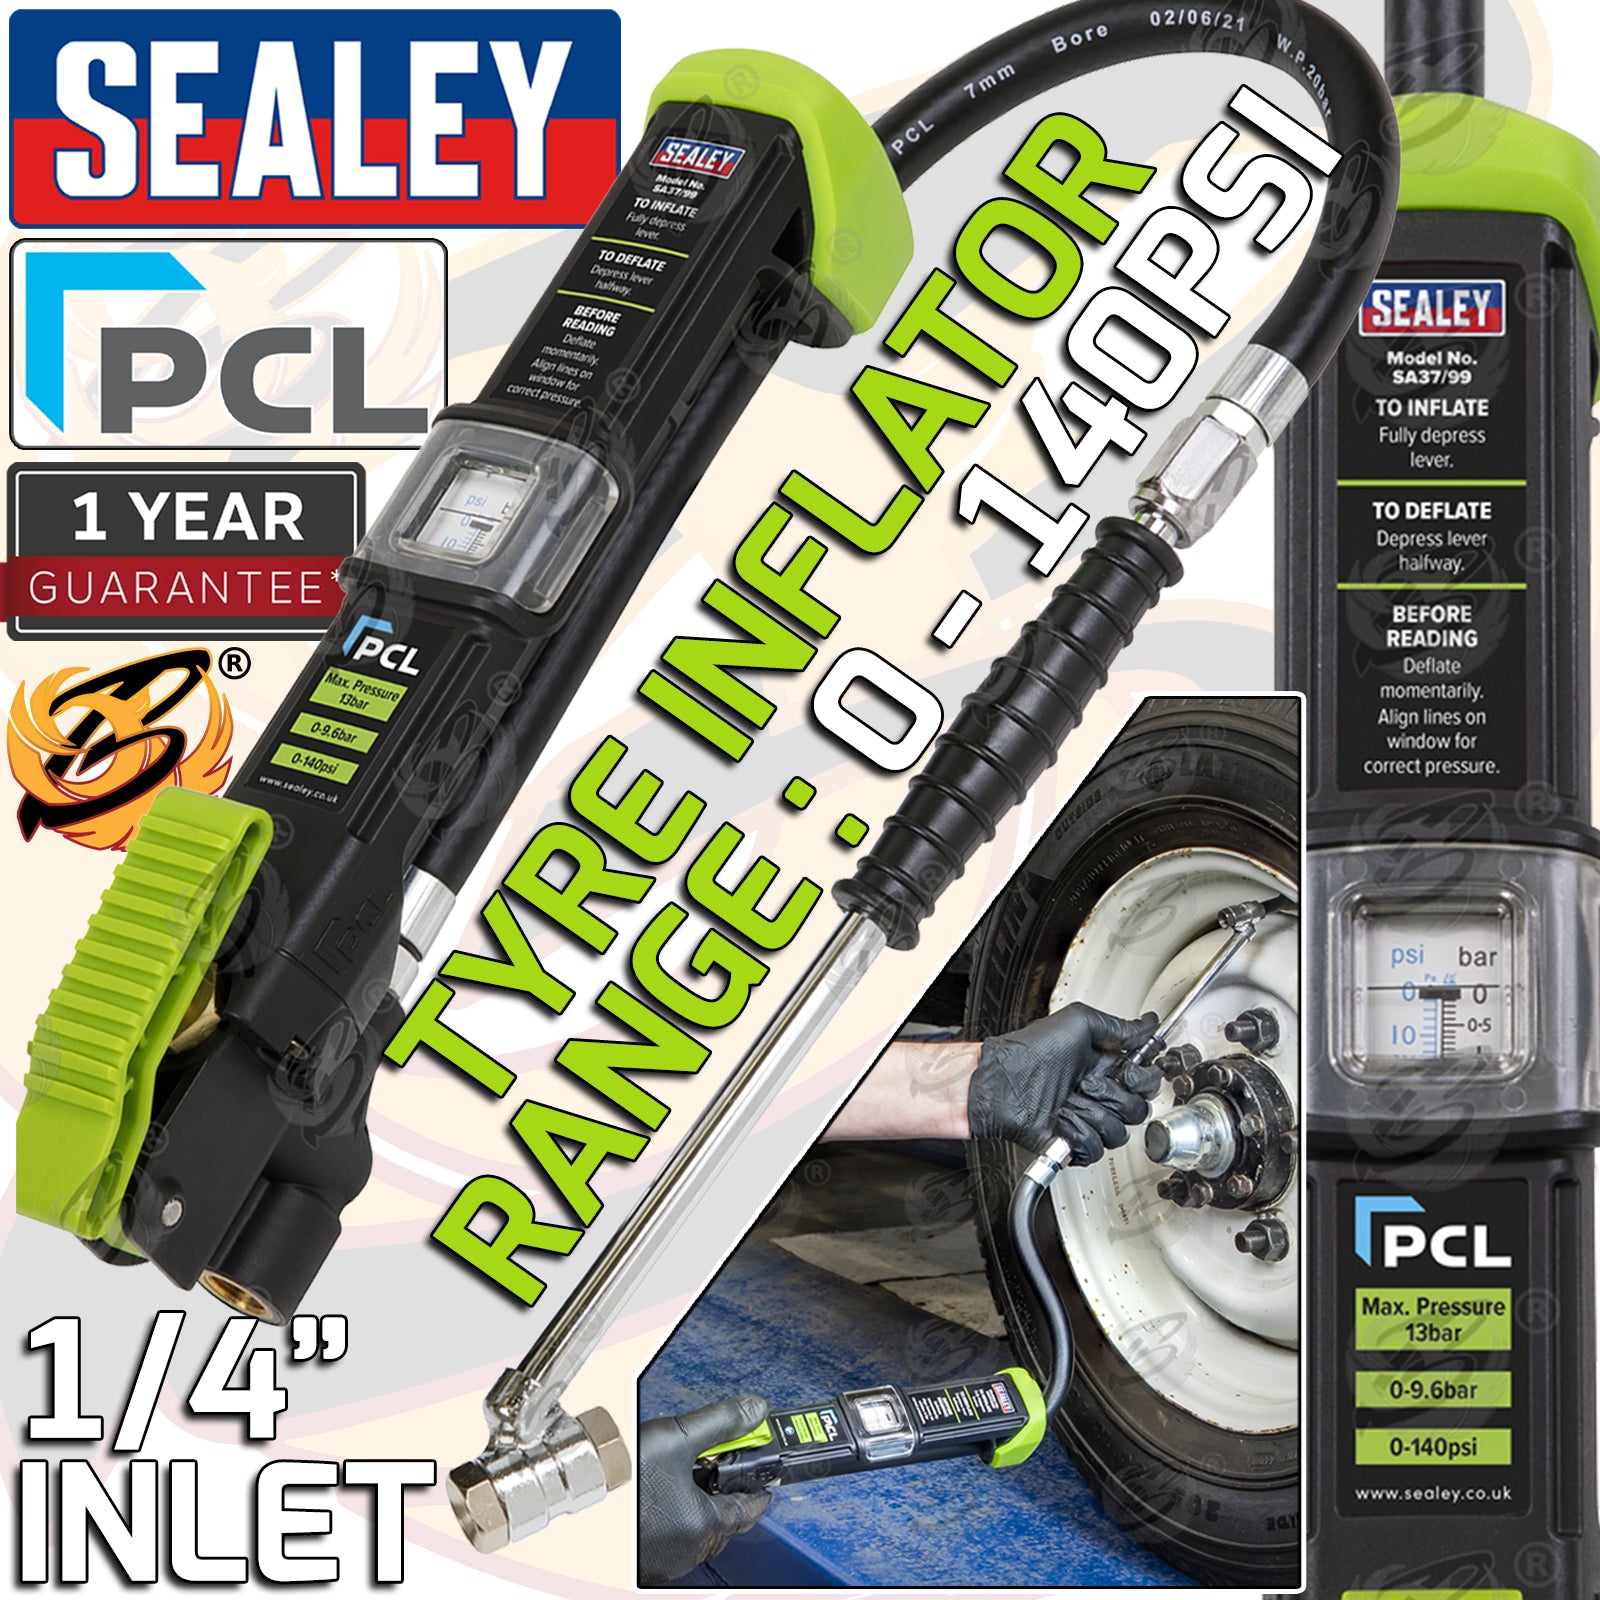 SEALEY PCL AIRLITE ECO TYRE INFLATOR WITH TWIN HOLD-ON CONNECTORS 0 - 140PSI